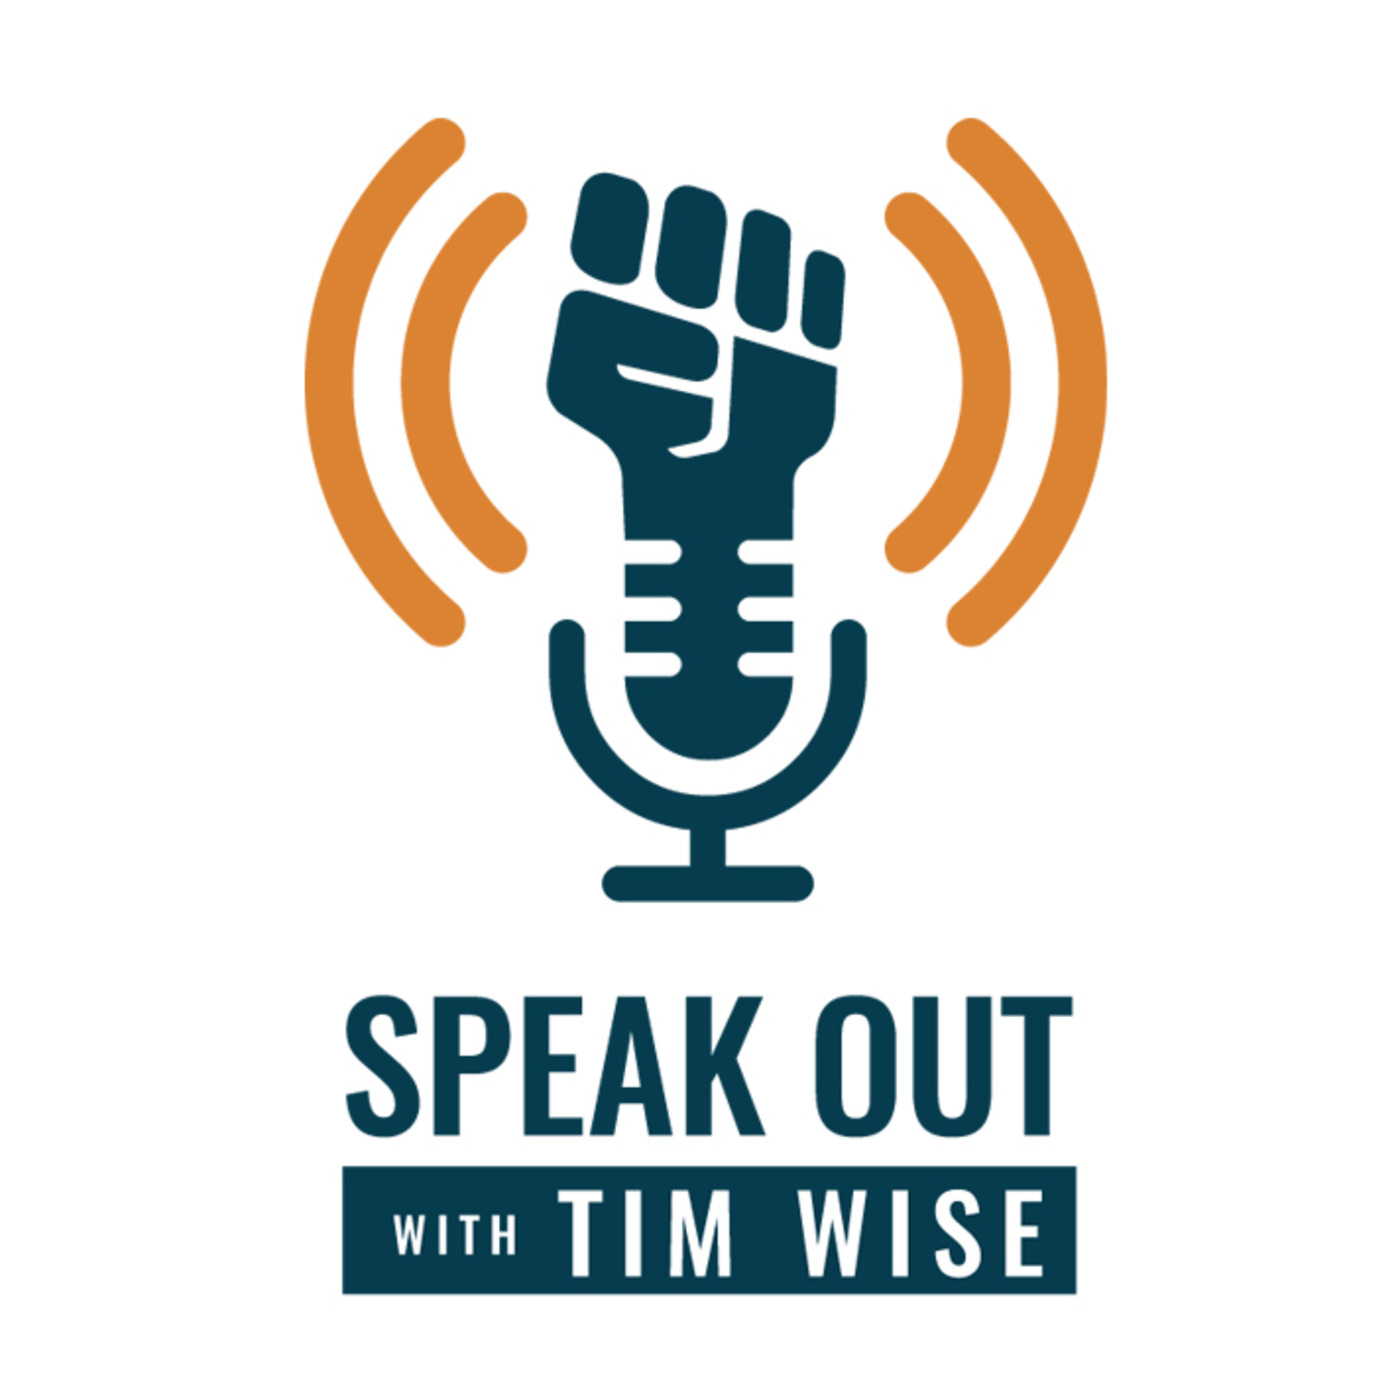 Episode 42: White Nationalism and the Absurdity of Neo-Nazi Rhetoric (A Best of Tim Wise Episode)